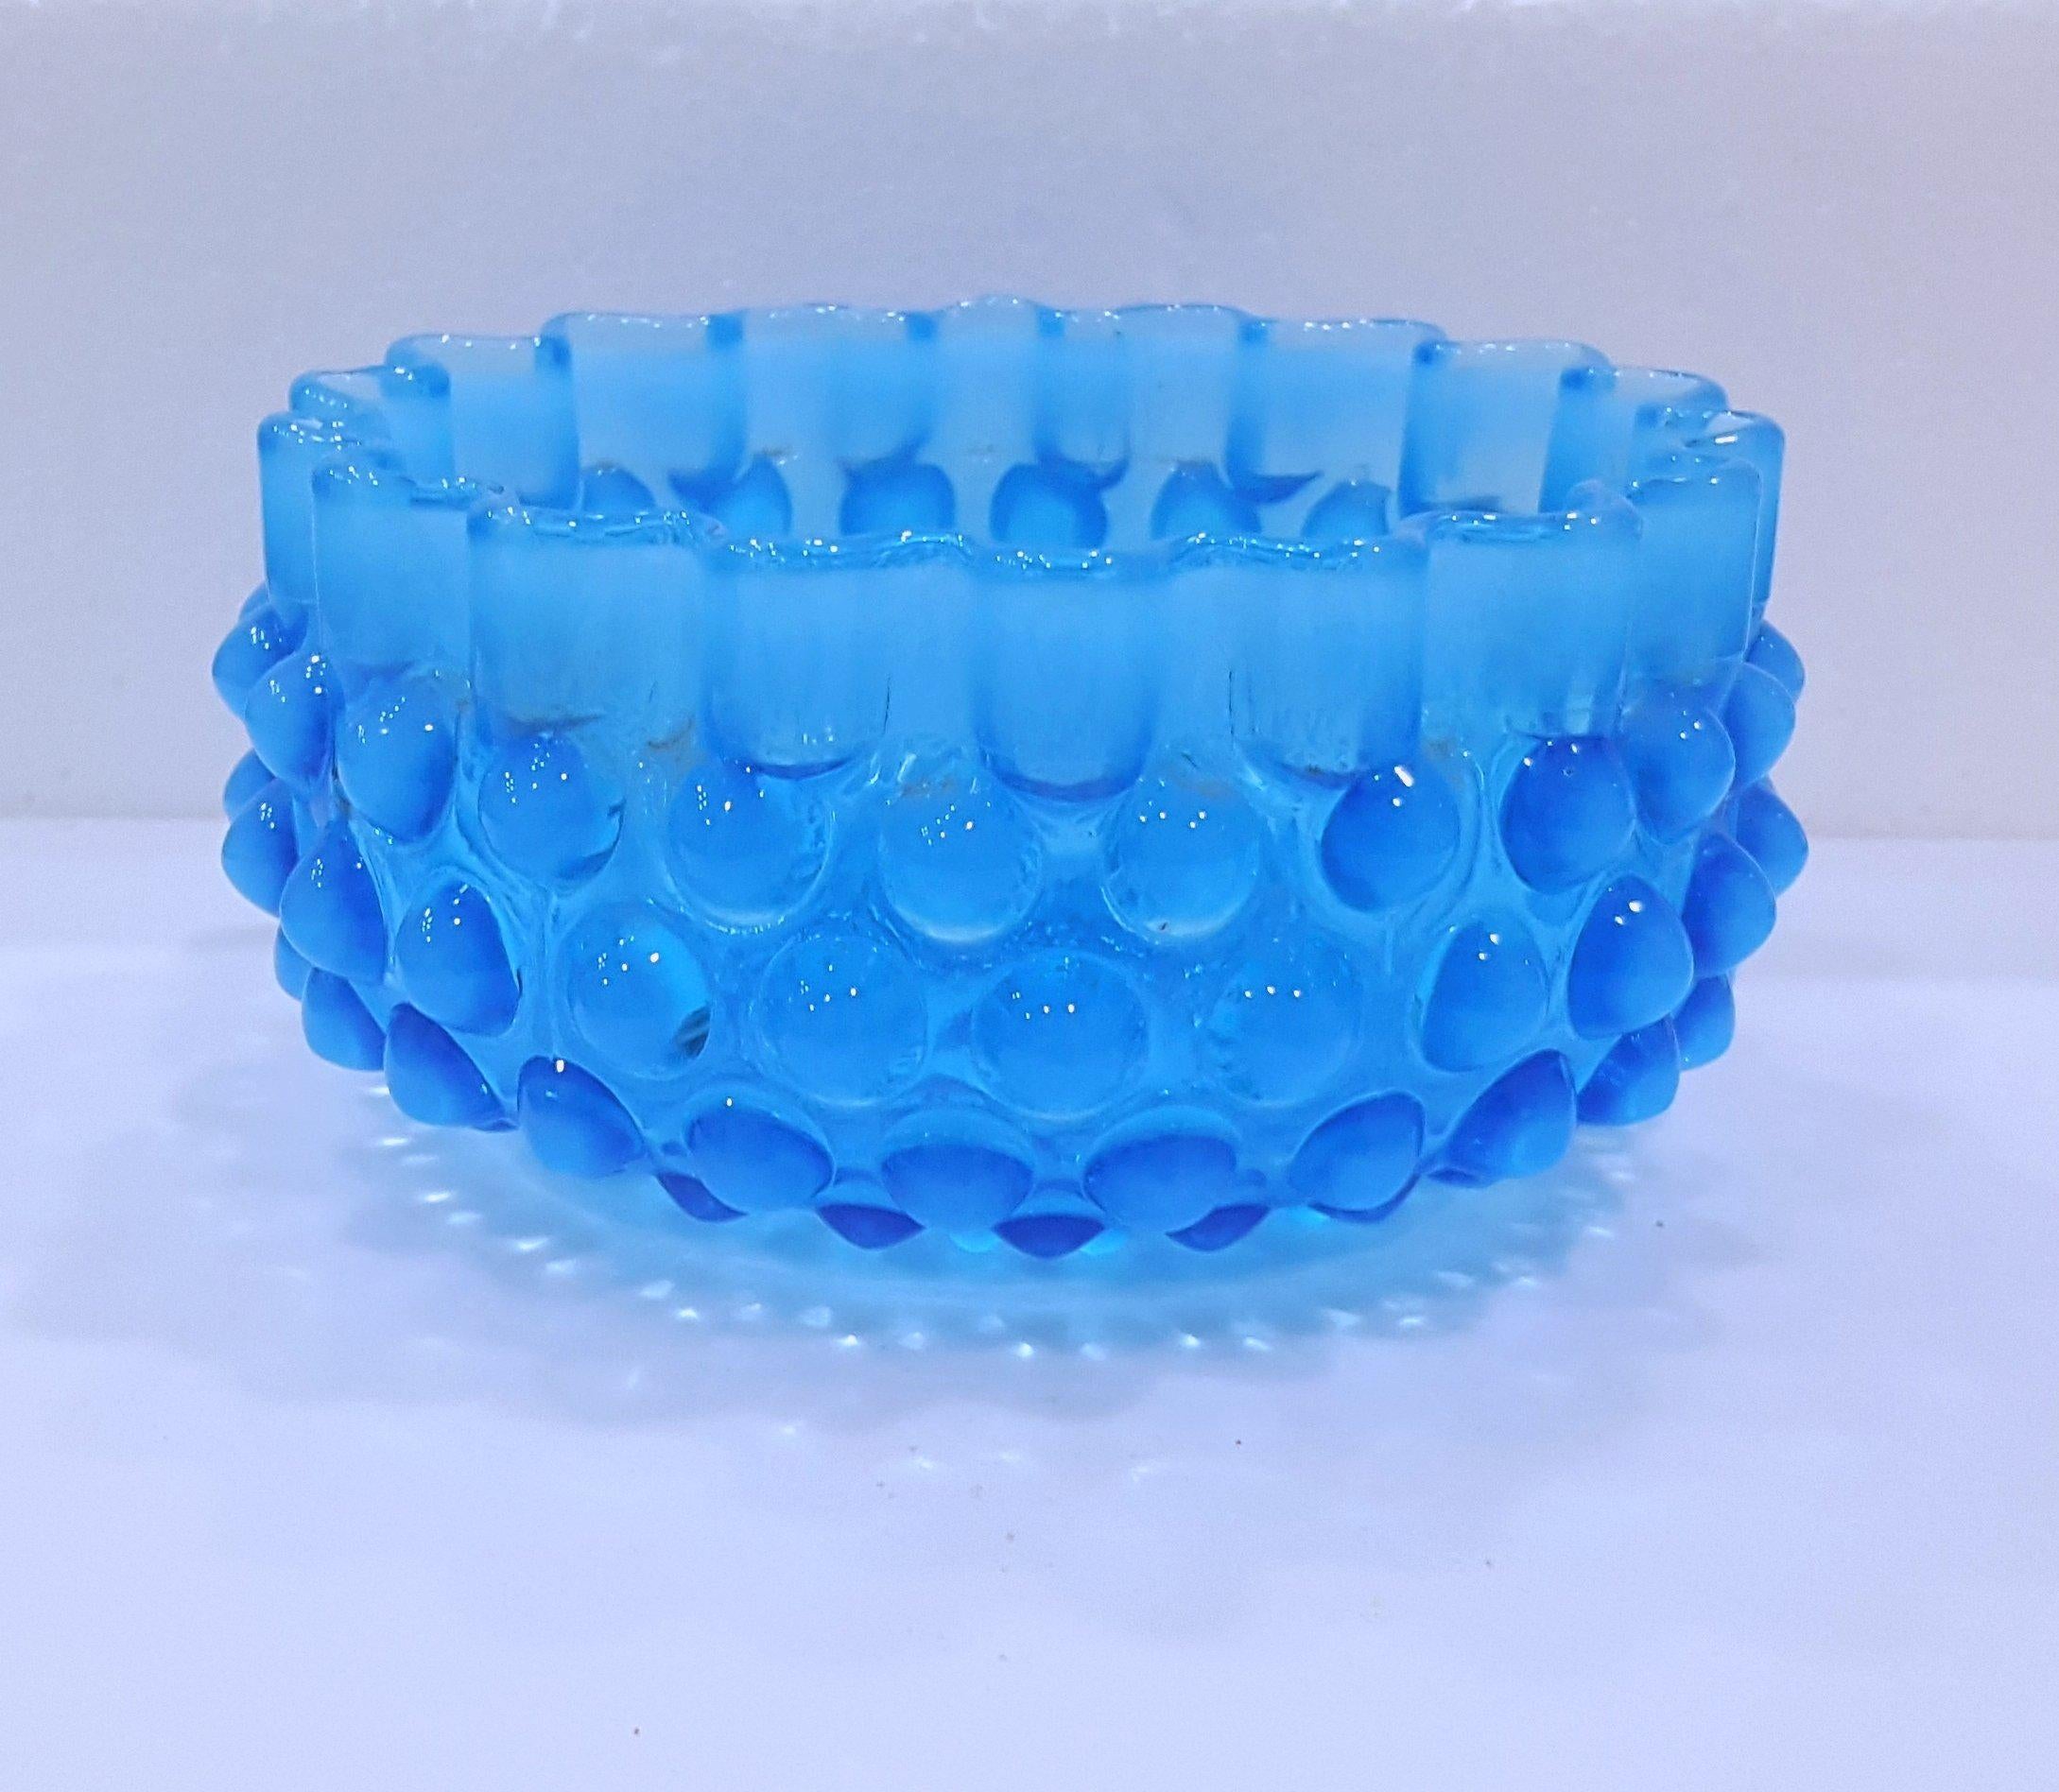 Antique Hobbs Brockunier Dewdrop, aka Hobnail, Glass Bowl - blue
5.75 x 2.75 inches apx
Very nice condition.

Measurements are approximate. Please be aware that the color on your monitor and/or in your environment may look slightly different than in